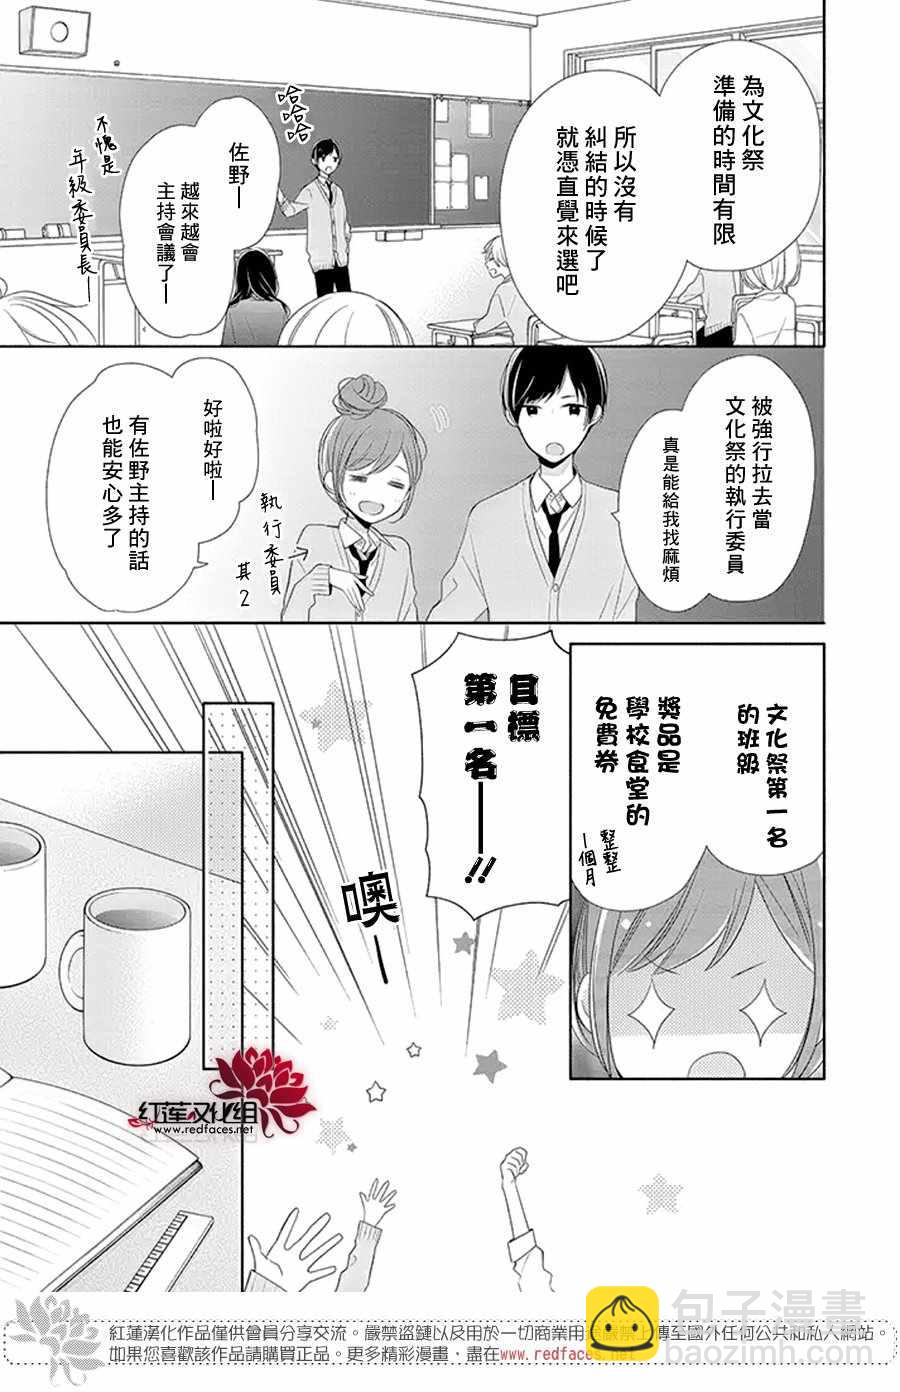 If given a second chance - 15话 - 3